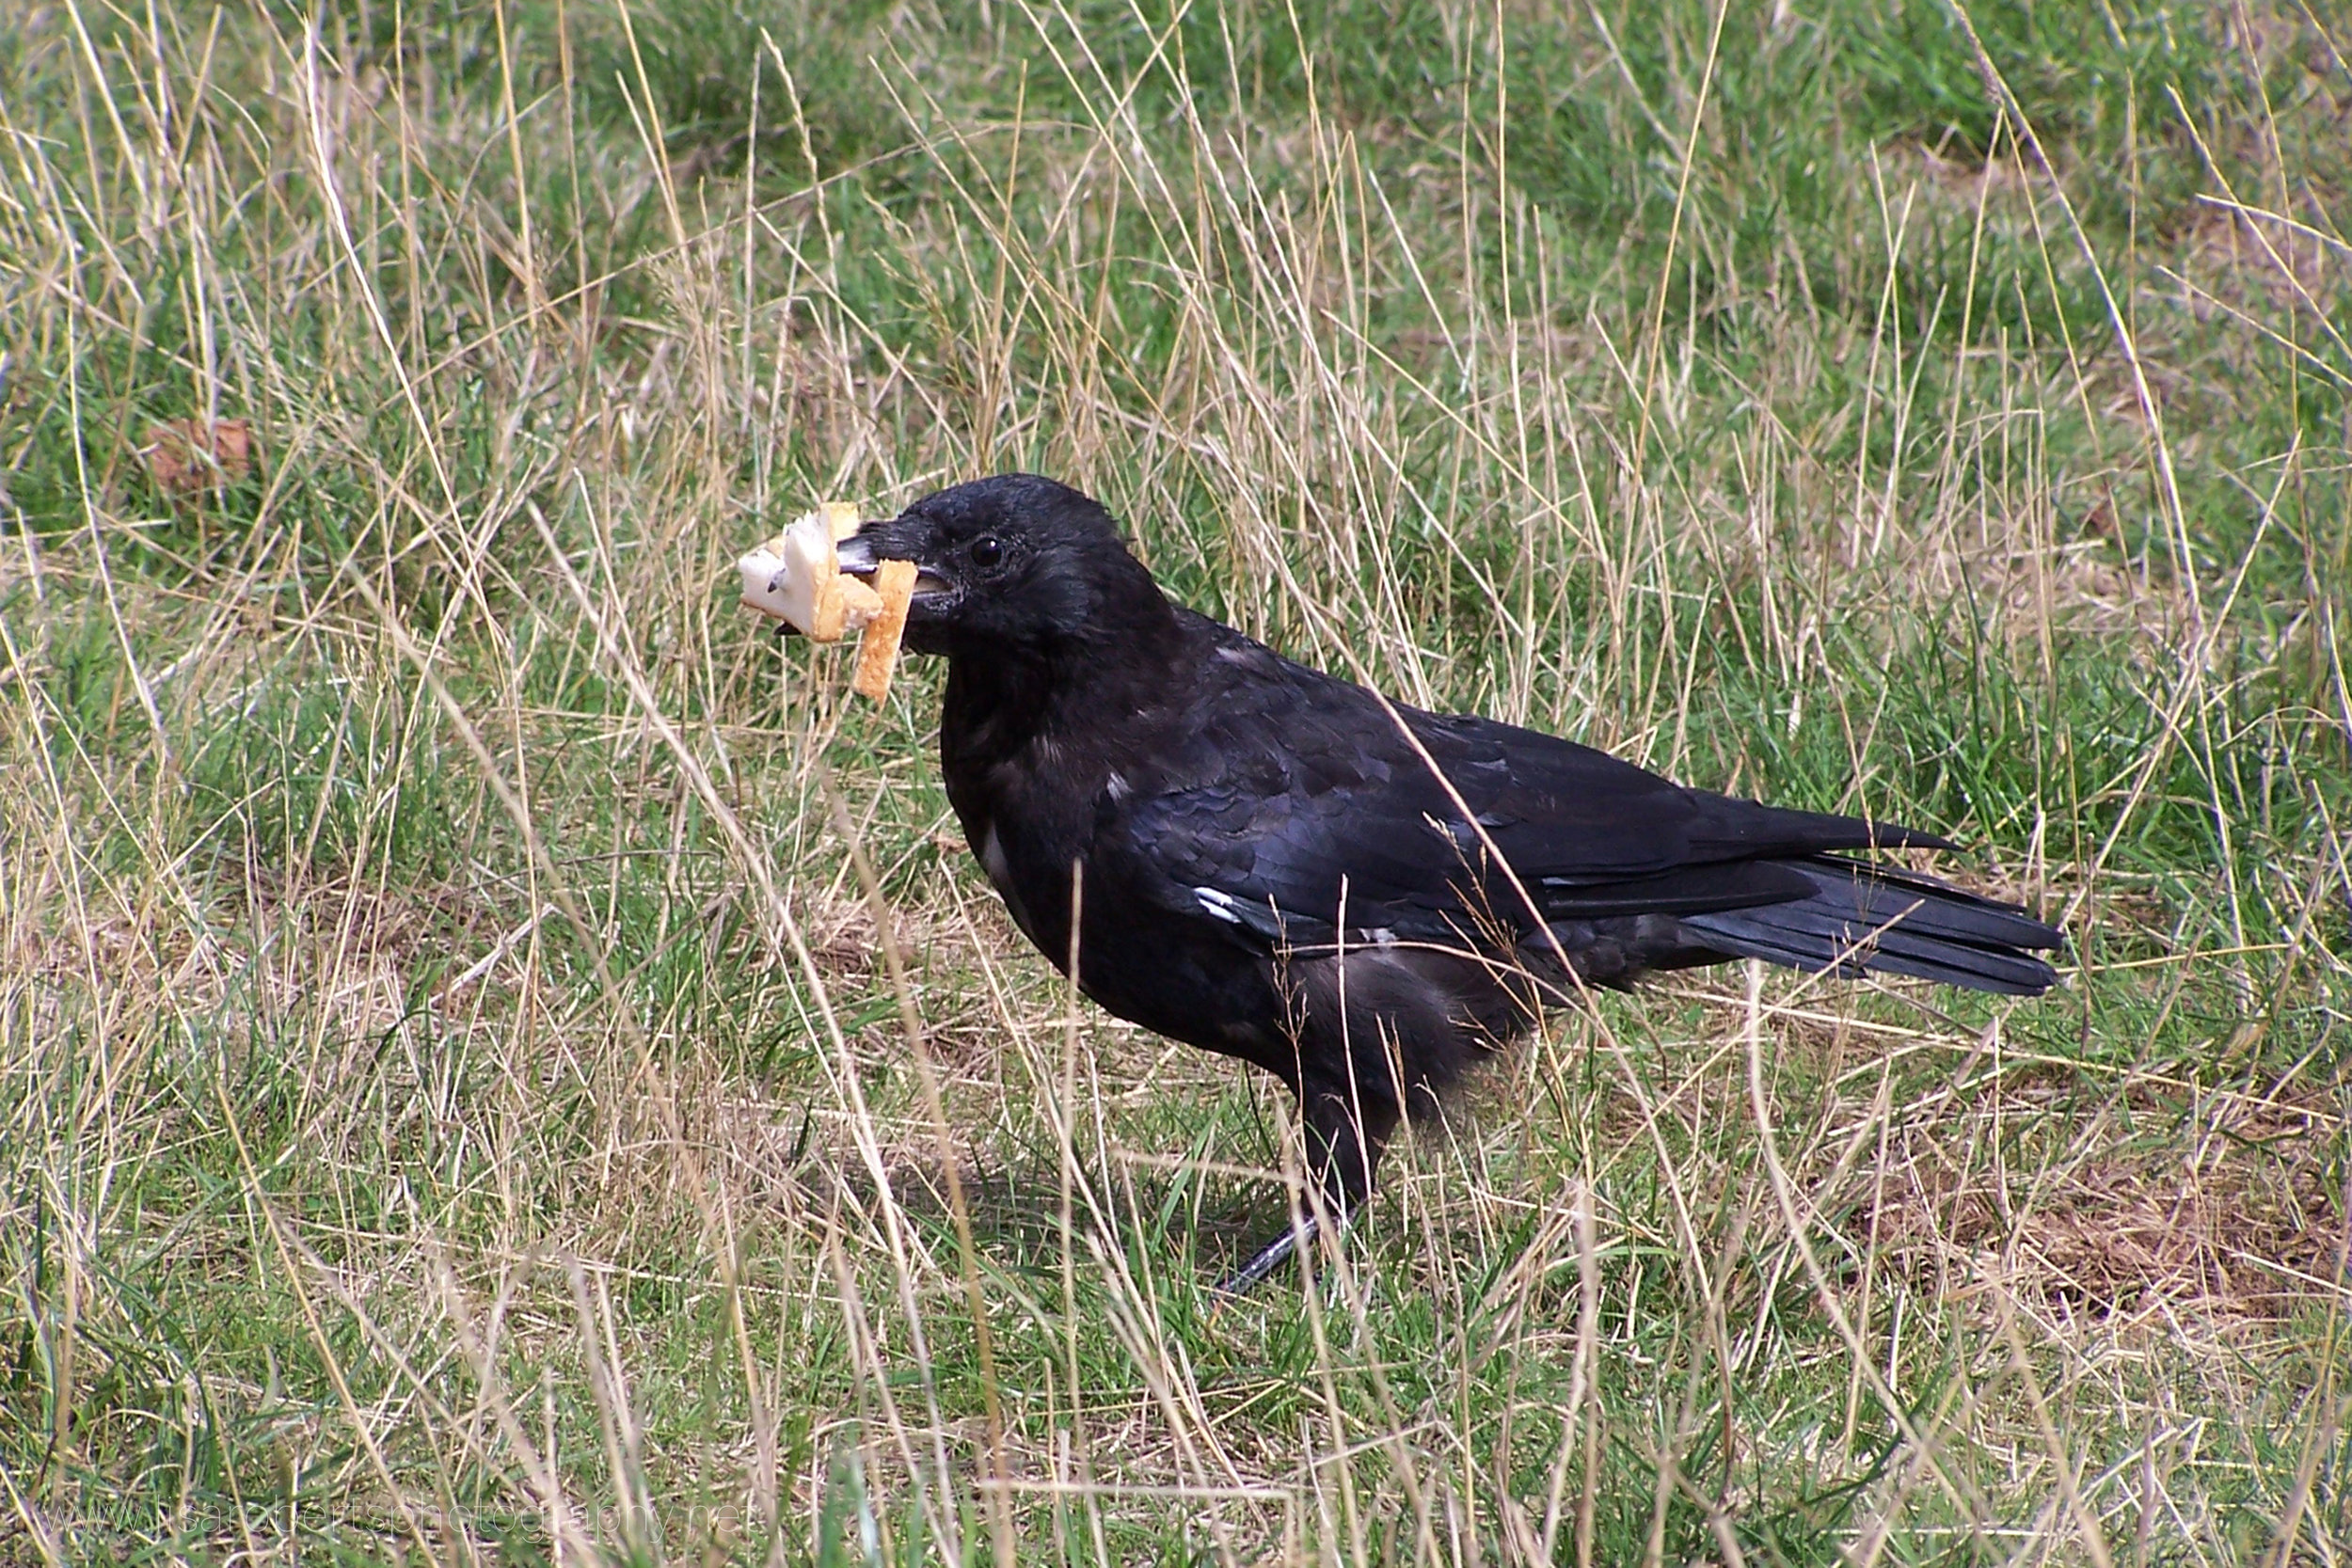  Crow eating bread 